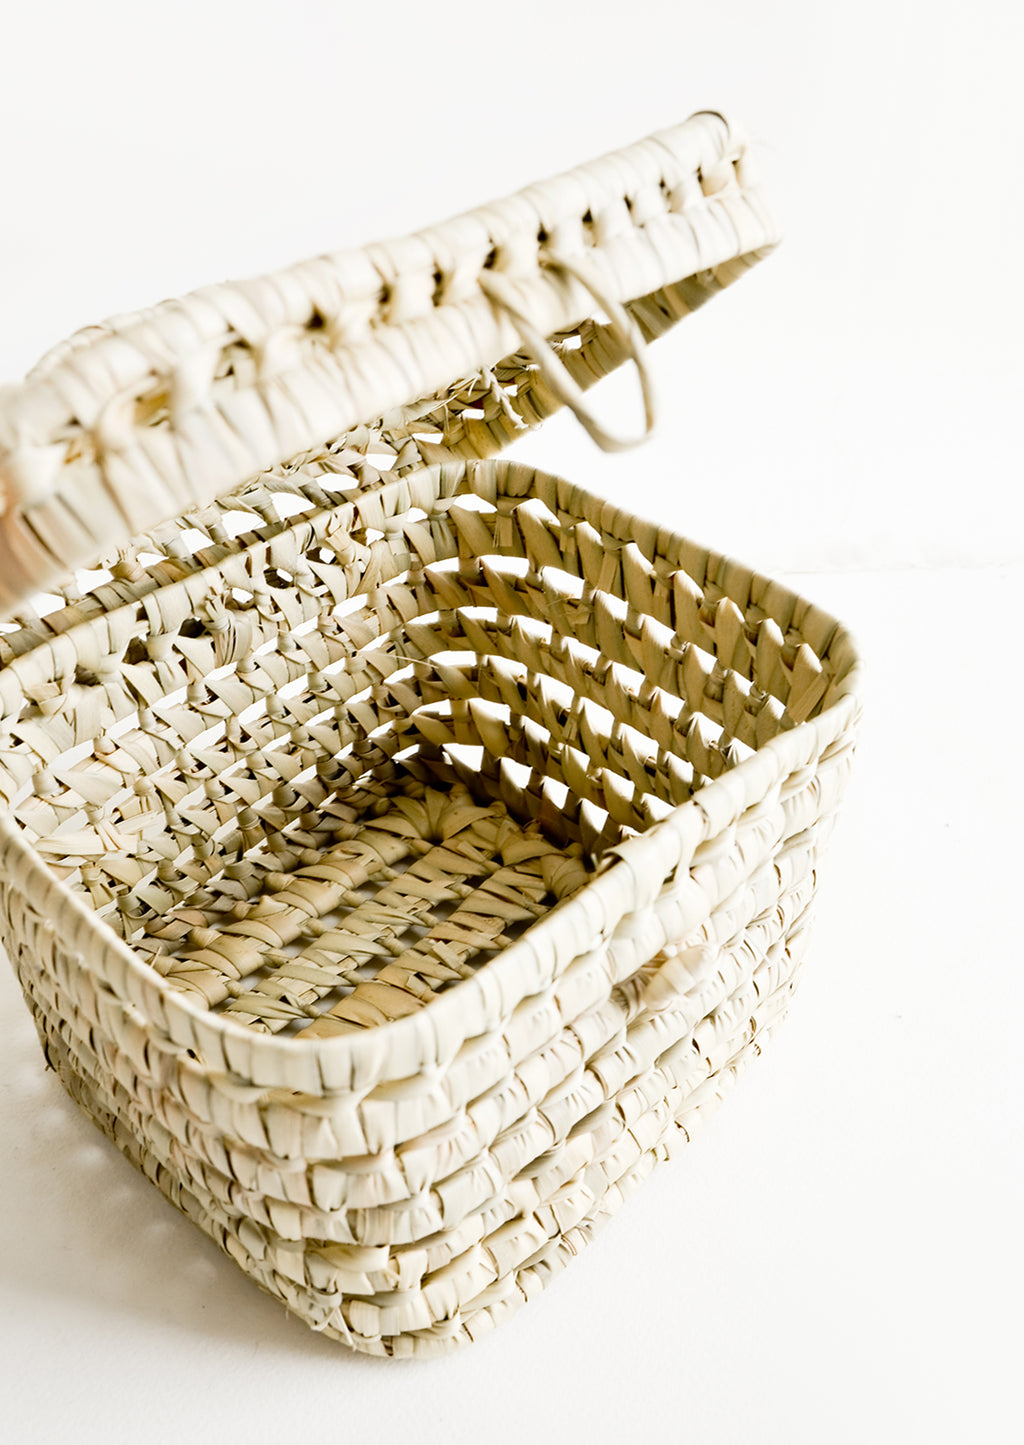 2: The empty interior of a square, lidded basket woven from natural palm leaf.